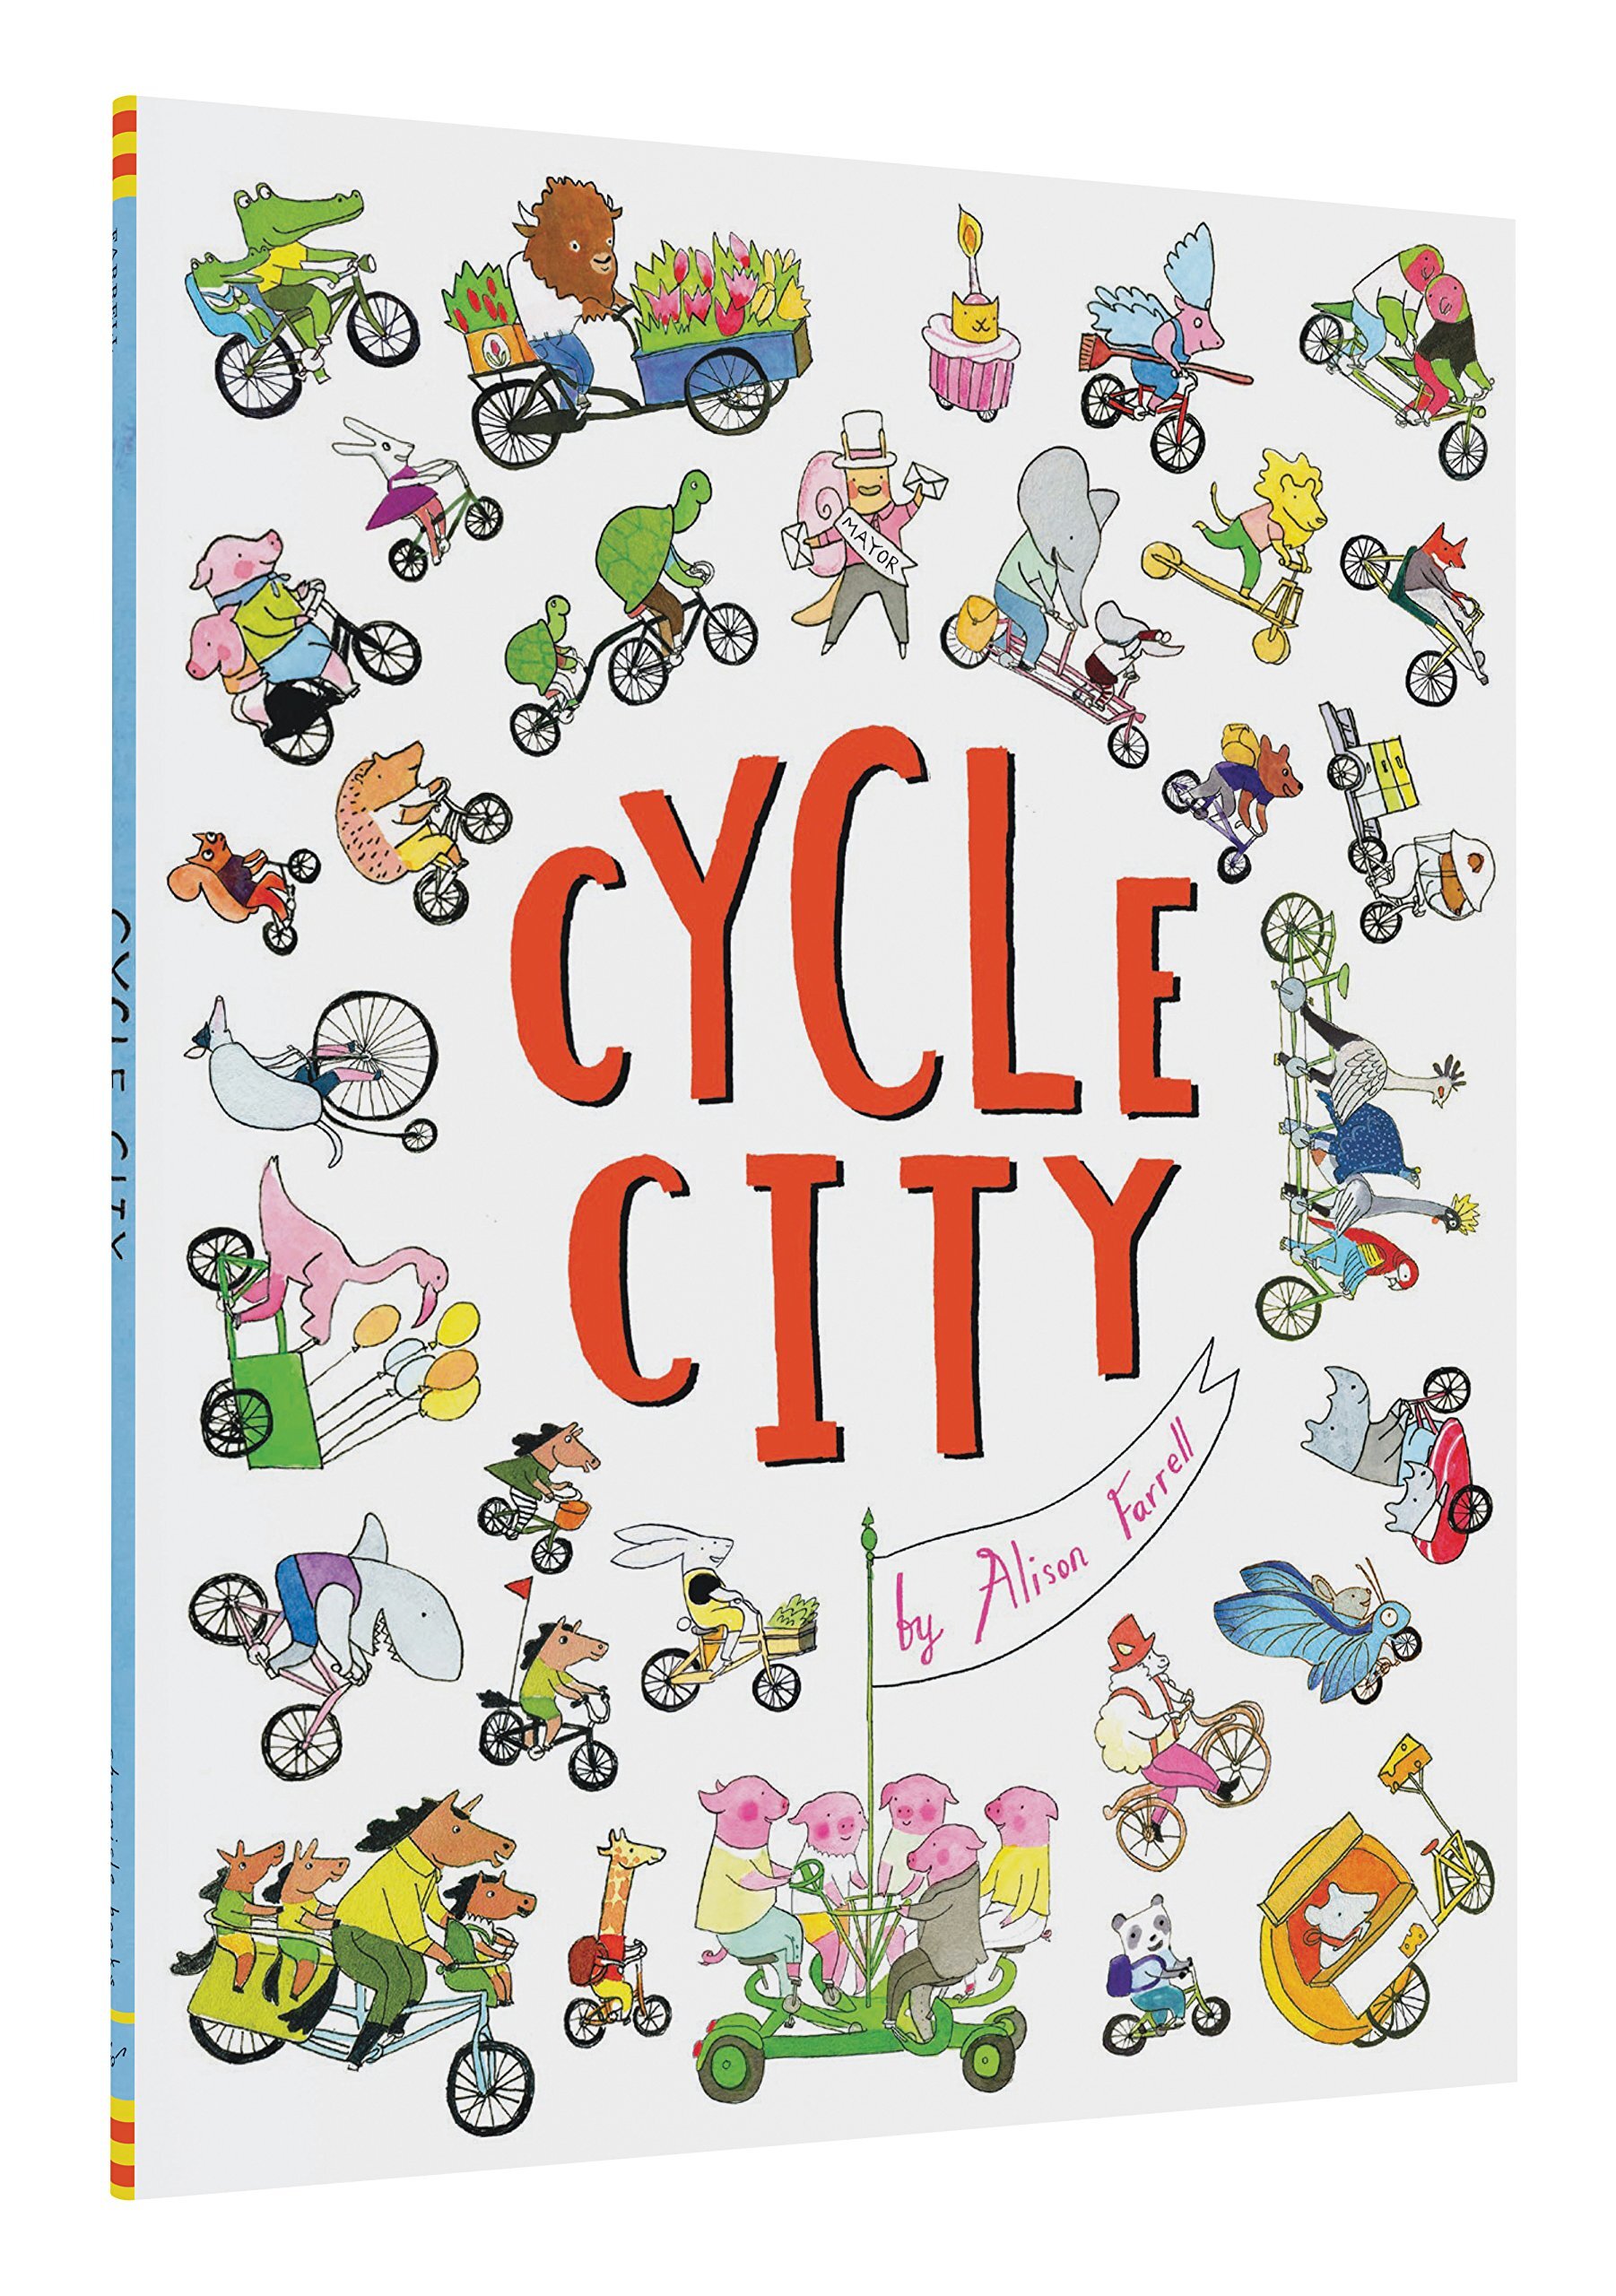 Cycle City is a great book choice for preschoolers in speech therapy.